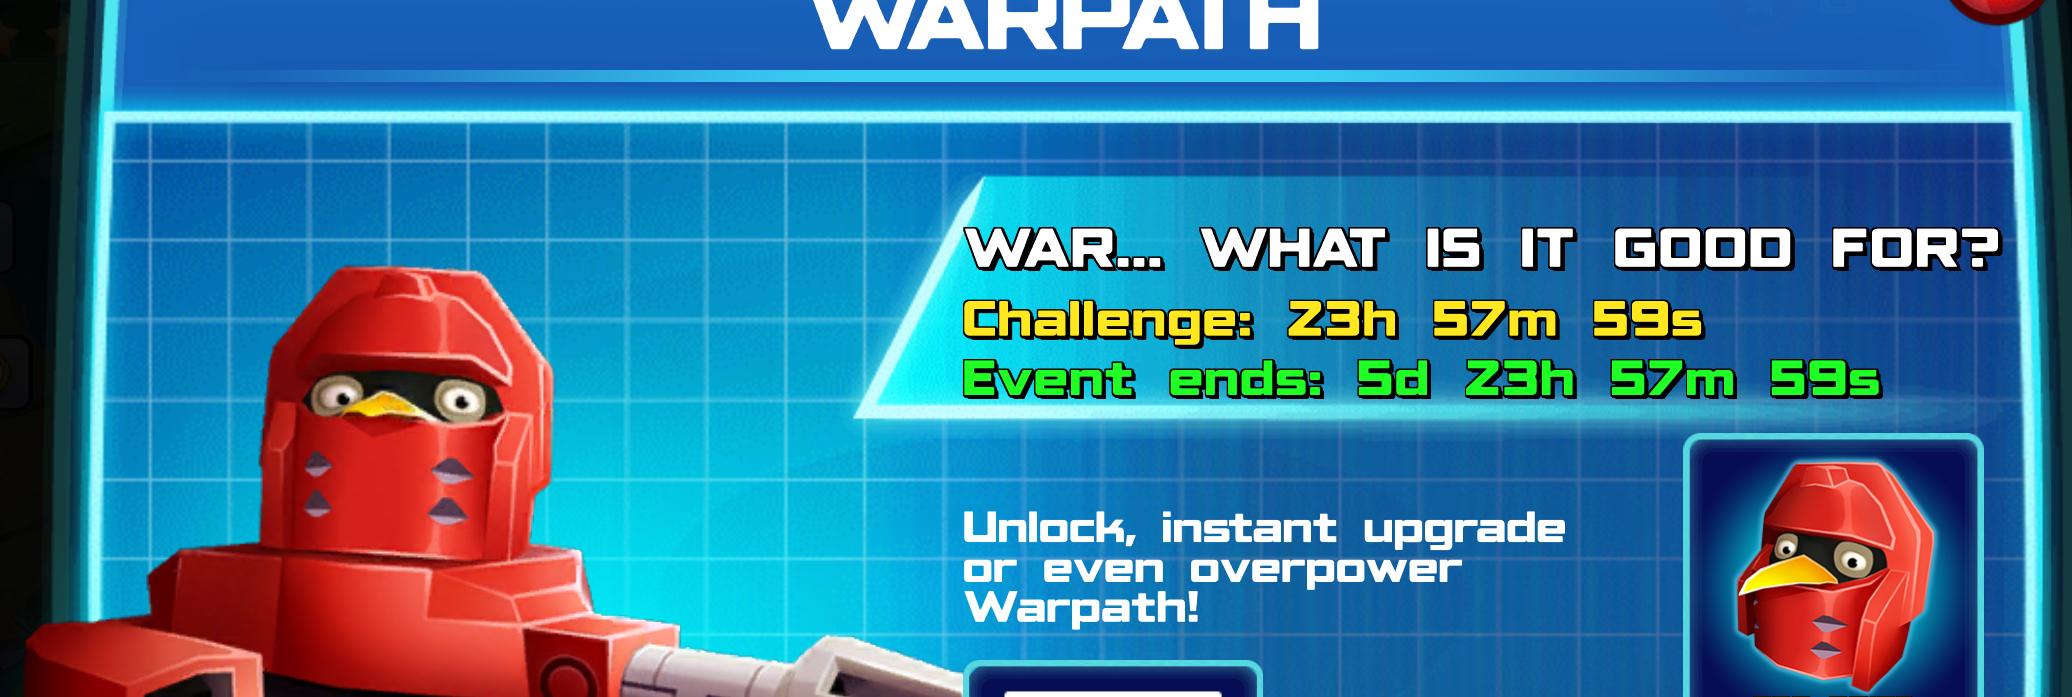 (Part of) The event banner for Warpath